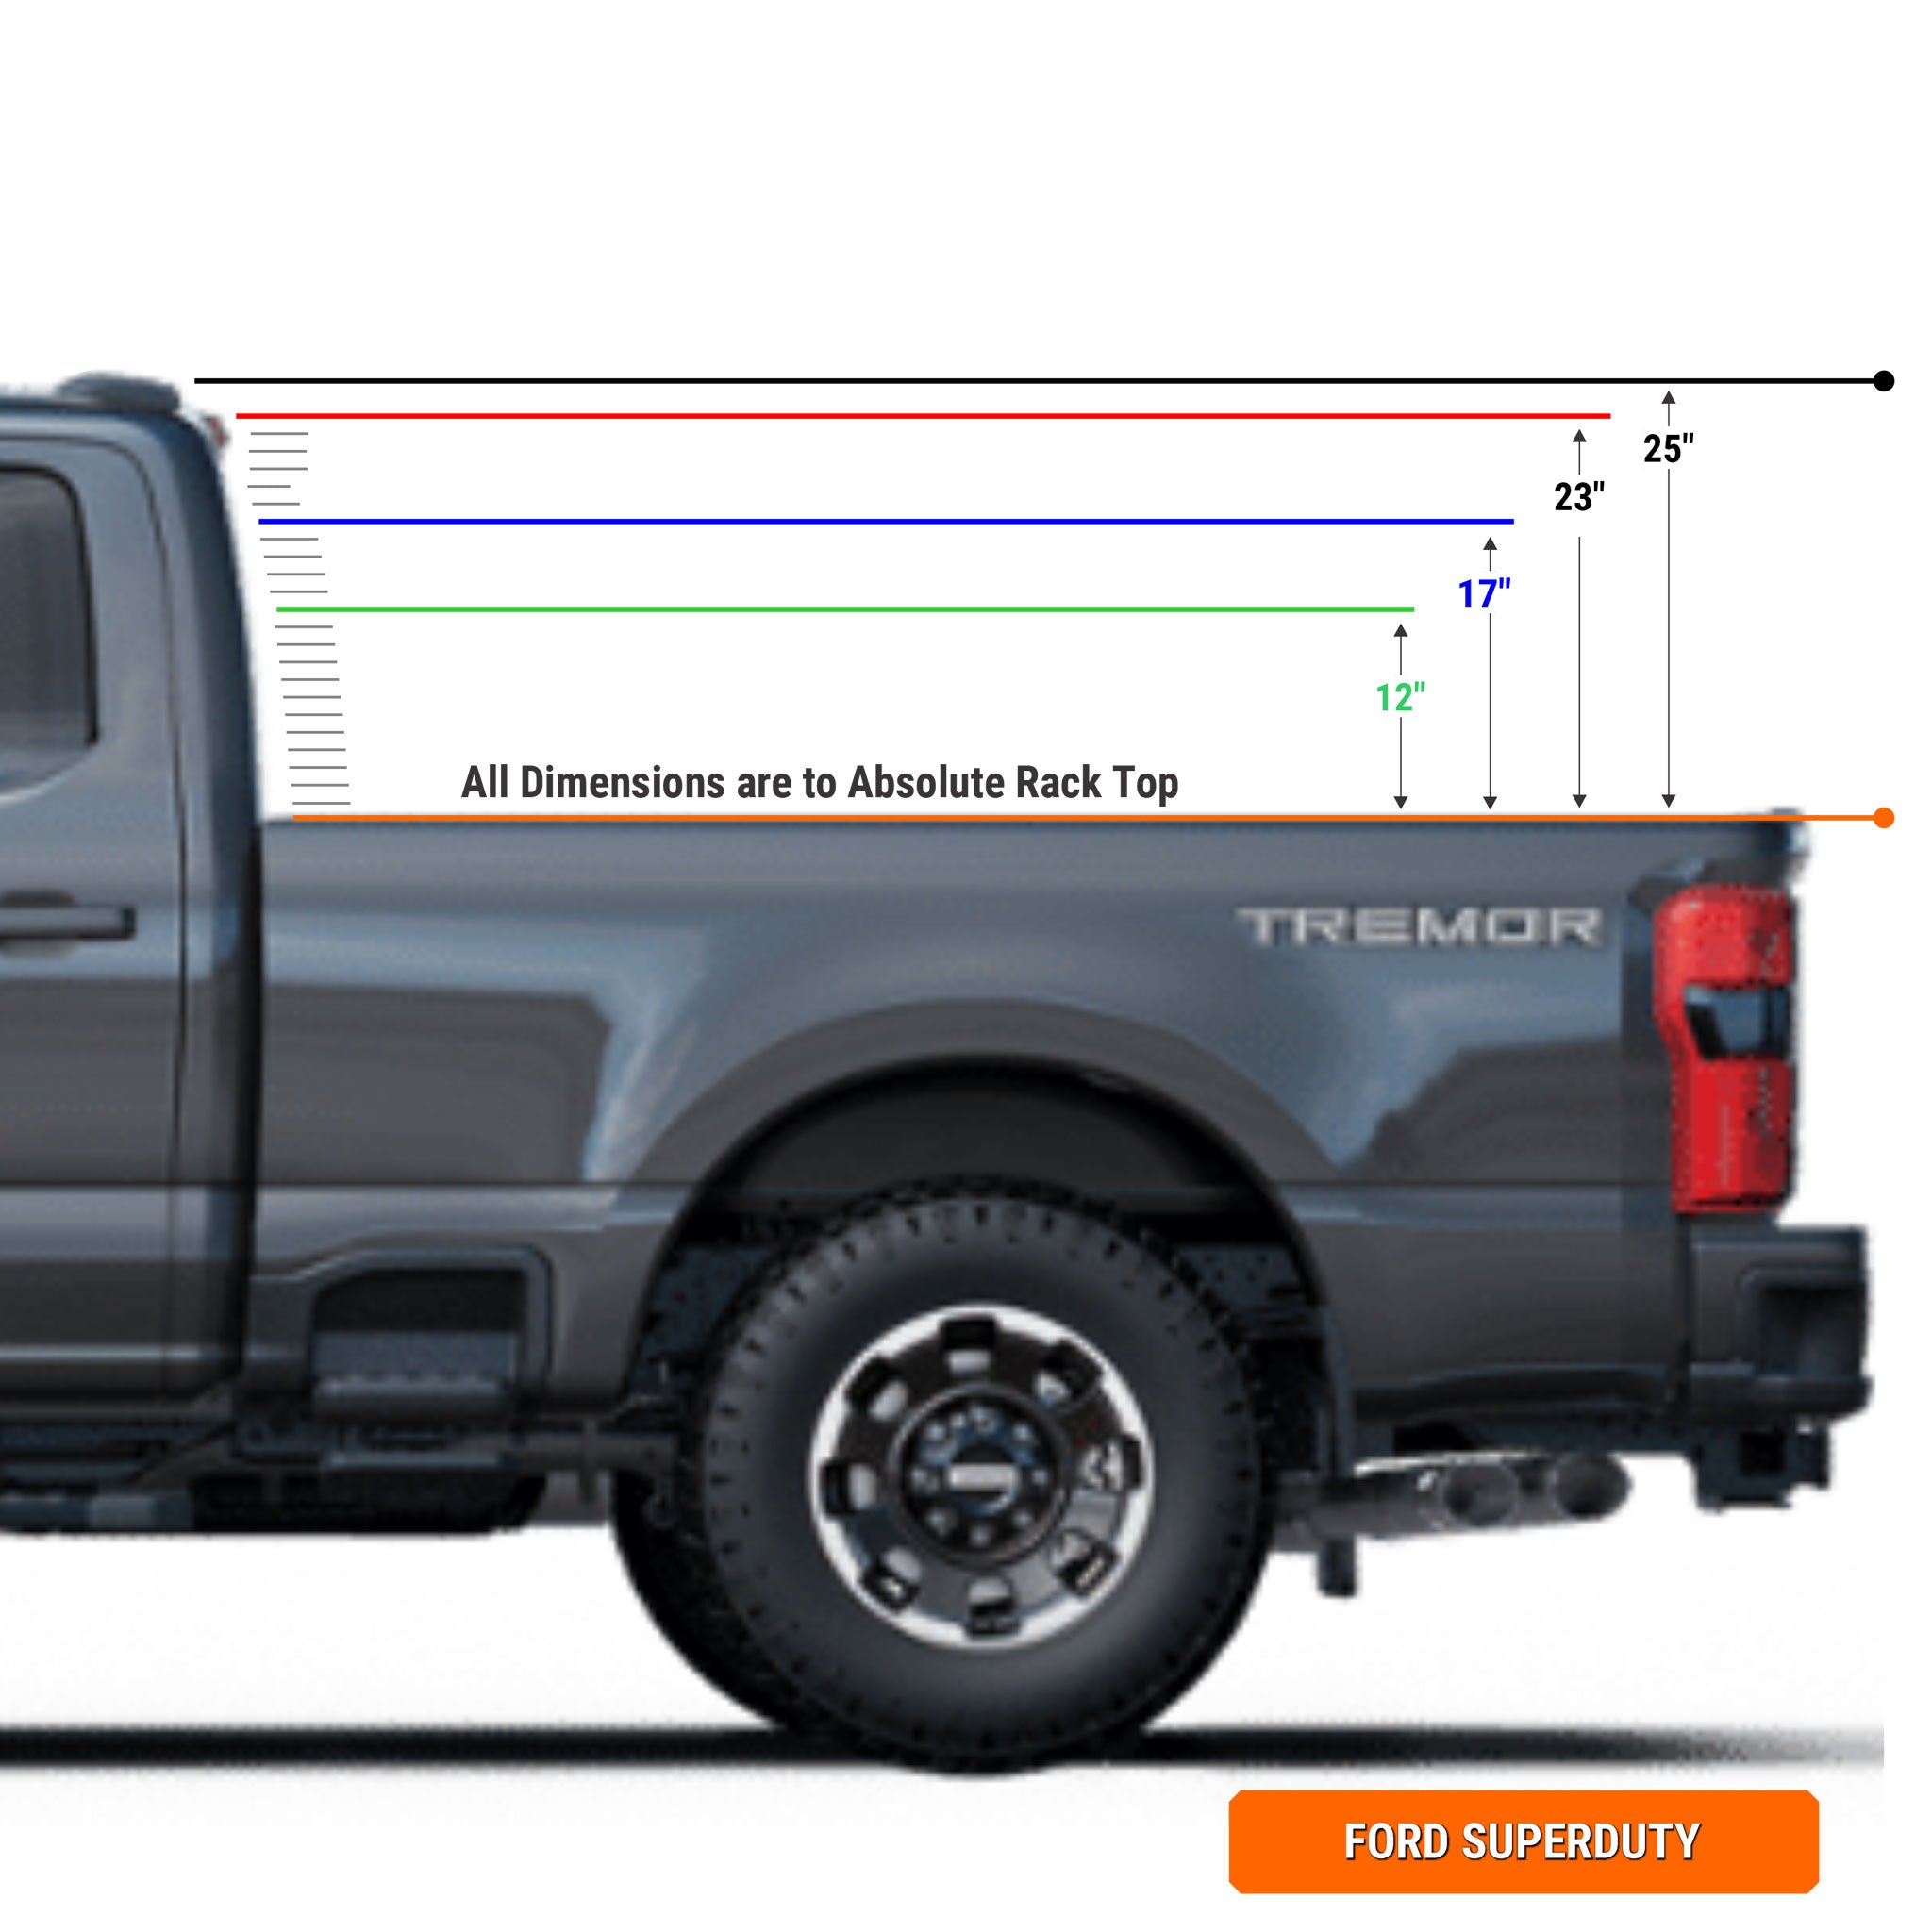 Ford Superduty F250 & F350 Bed Rack Height Chart